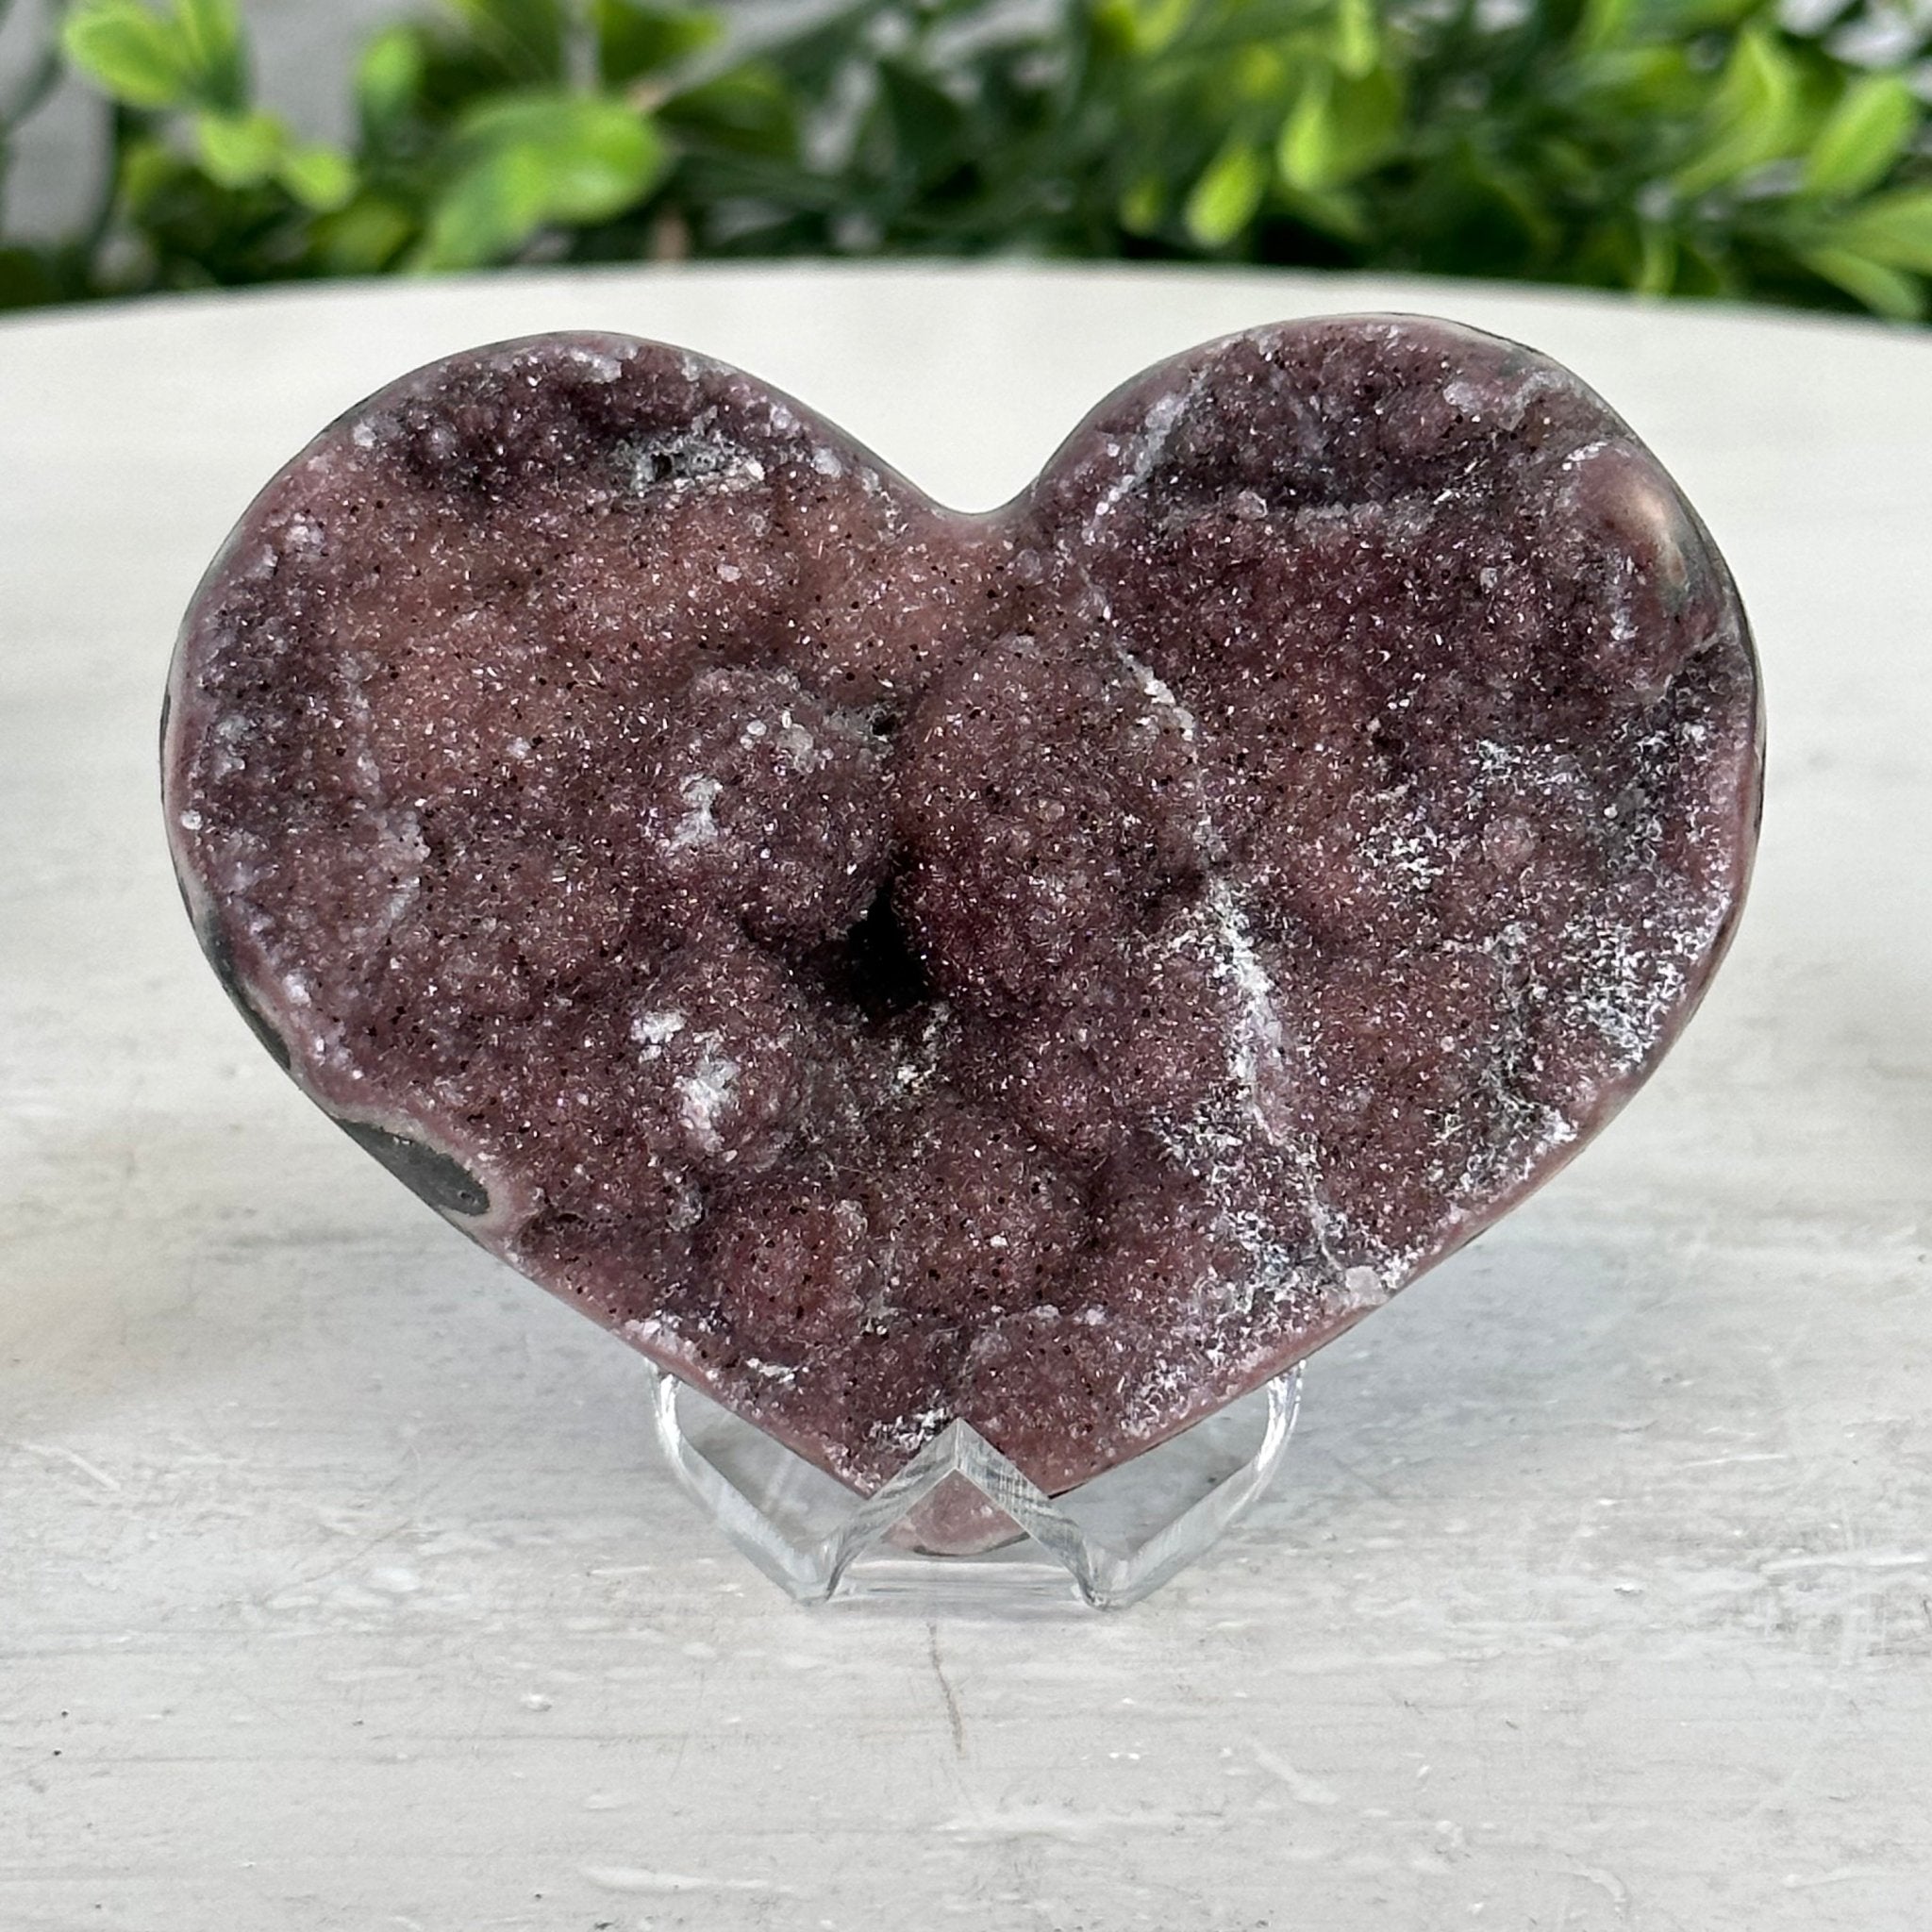 Extra Plus Quality Amethyst Heart Geode on an Acrylic Stand, 0.32 lbs & 2.4" Tall #5462-0027 by Brazil Gems - Brazil GemsBrazil GemsExtra Plus Quality Amethyst Heart Geode on an Acrylic Stand, 0.32 lbs & 2.4" Tall #5462-0027 by Brazil GemsHearts5462-0027